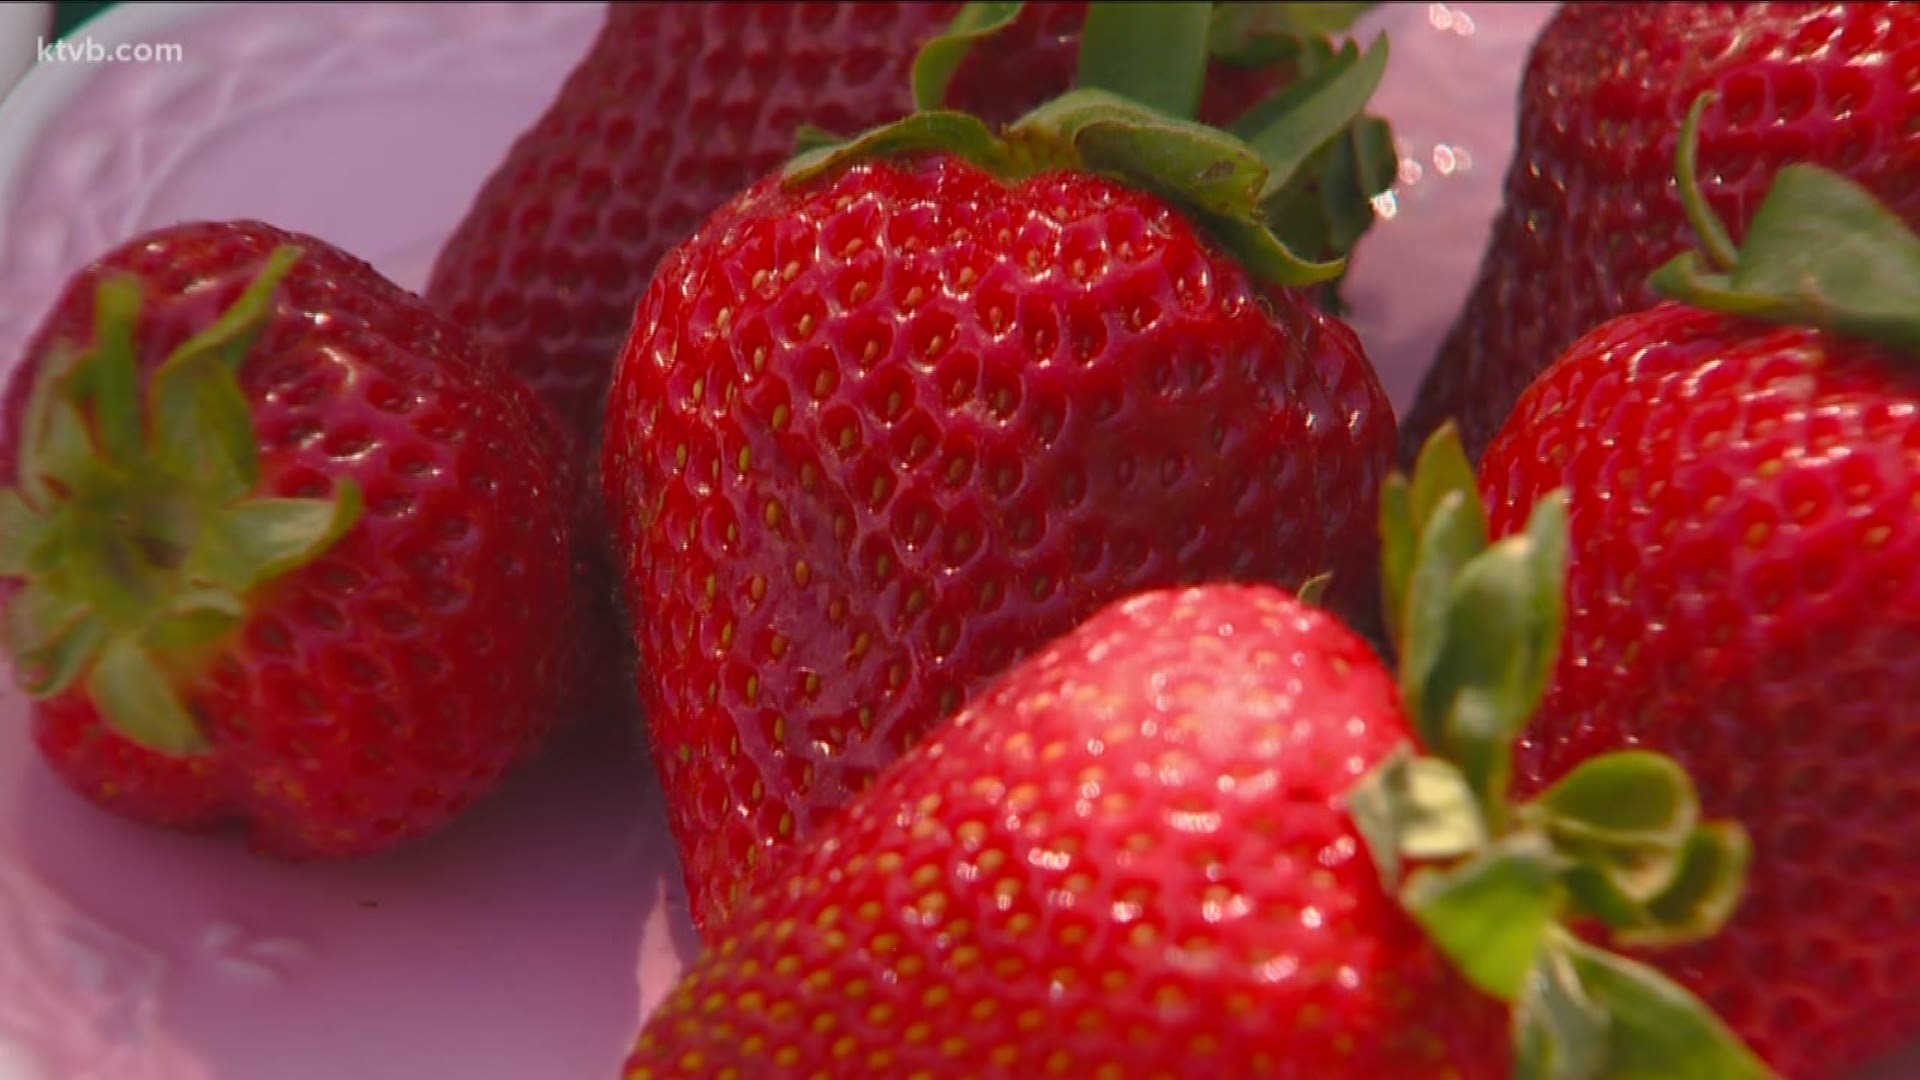 Did you know strawberries are not actually berries?